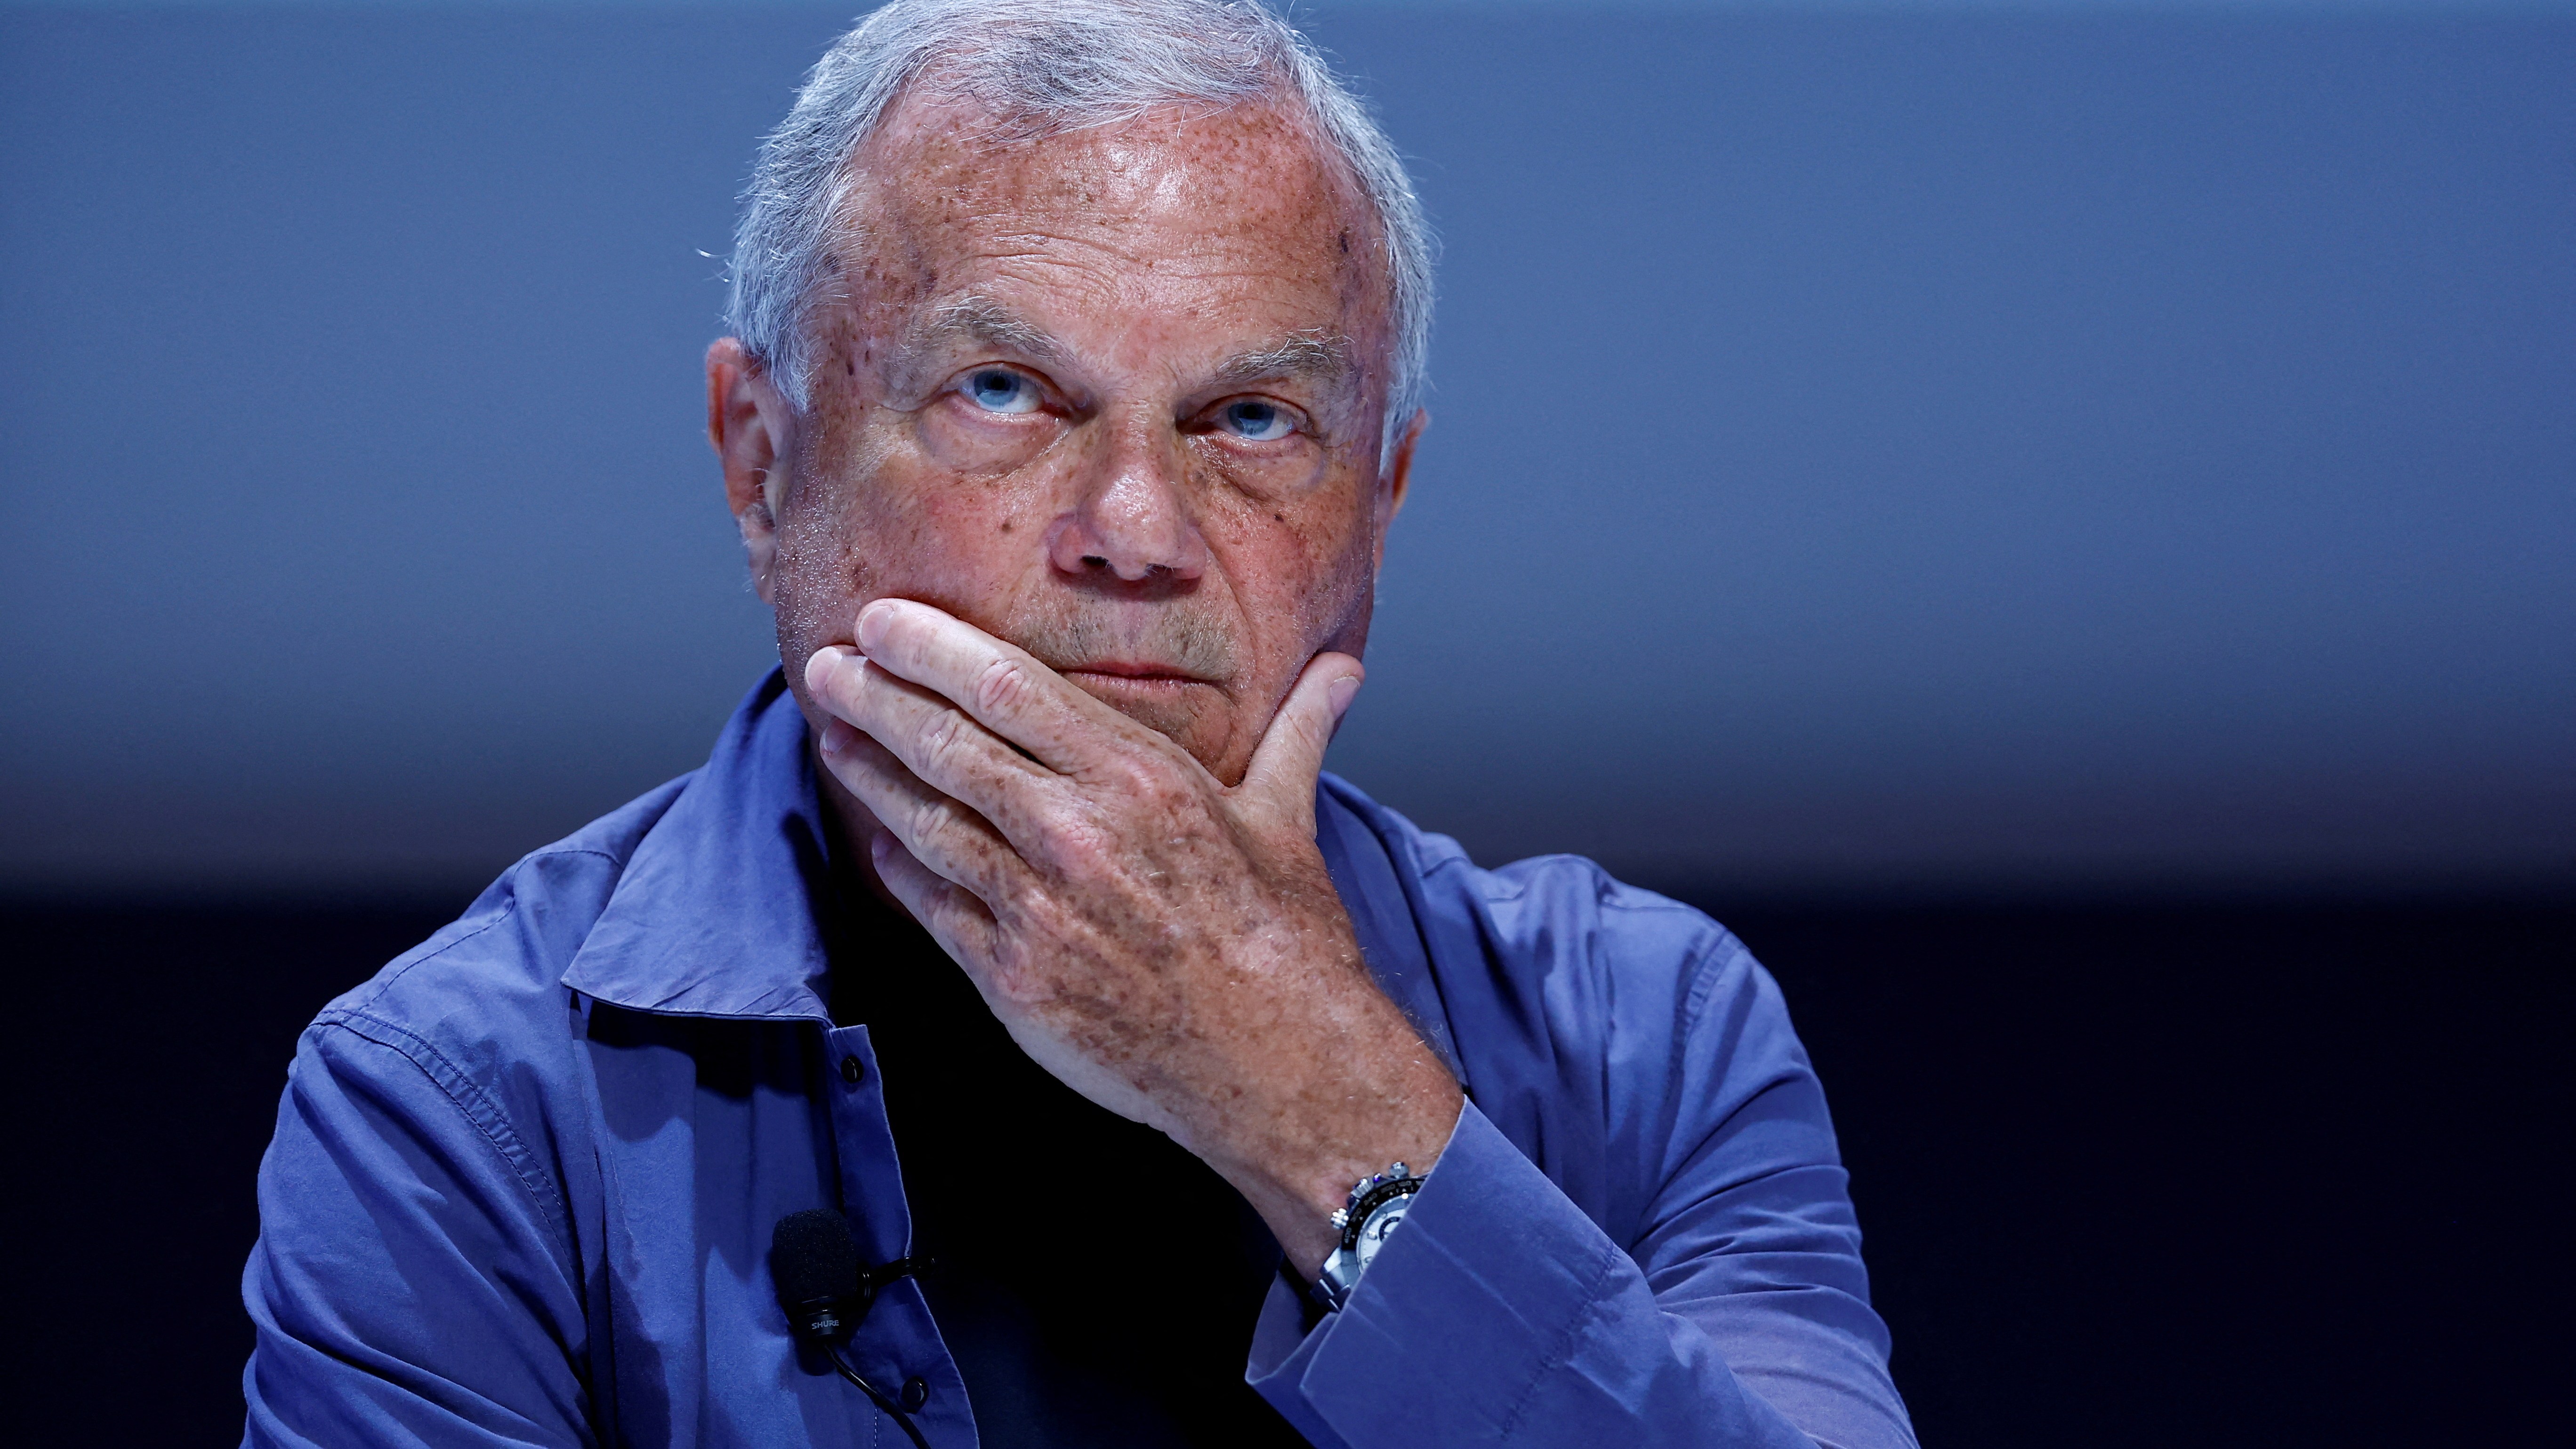 Sir Martin Sorrell, founder and executive chairman of S4 Capital, said the business was going to focus on streamlining, share buybacks and dividends